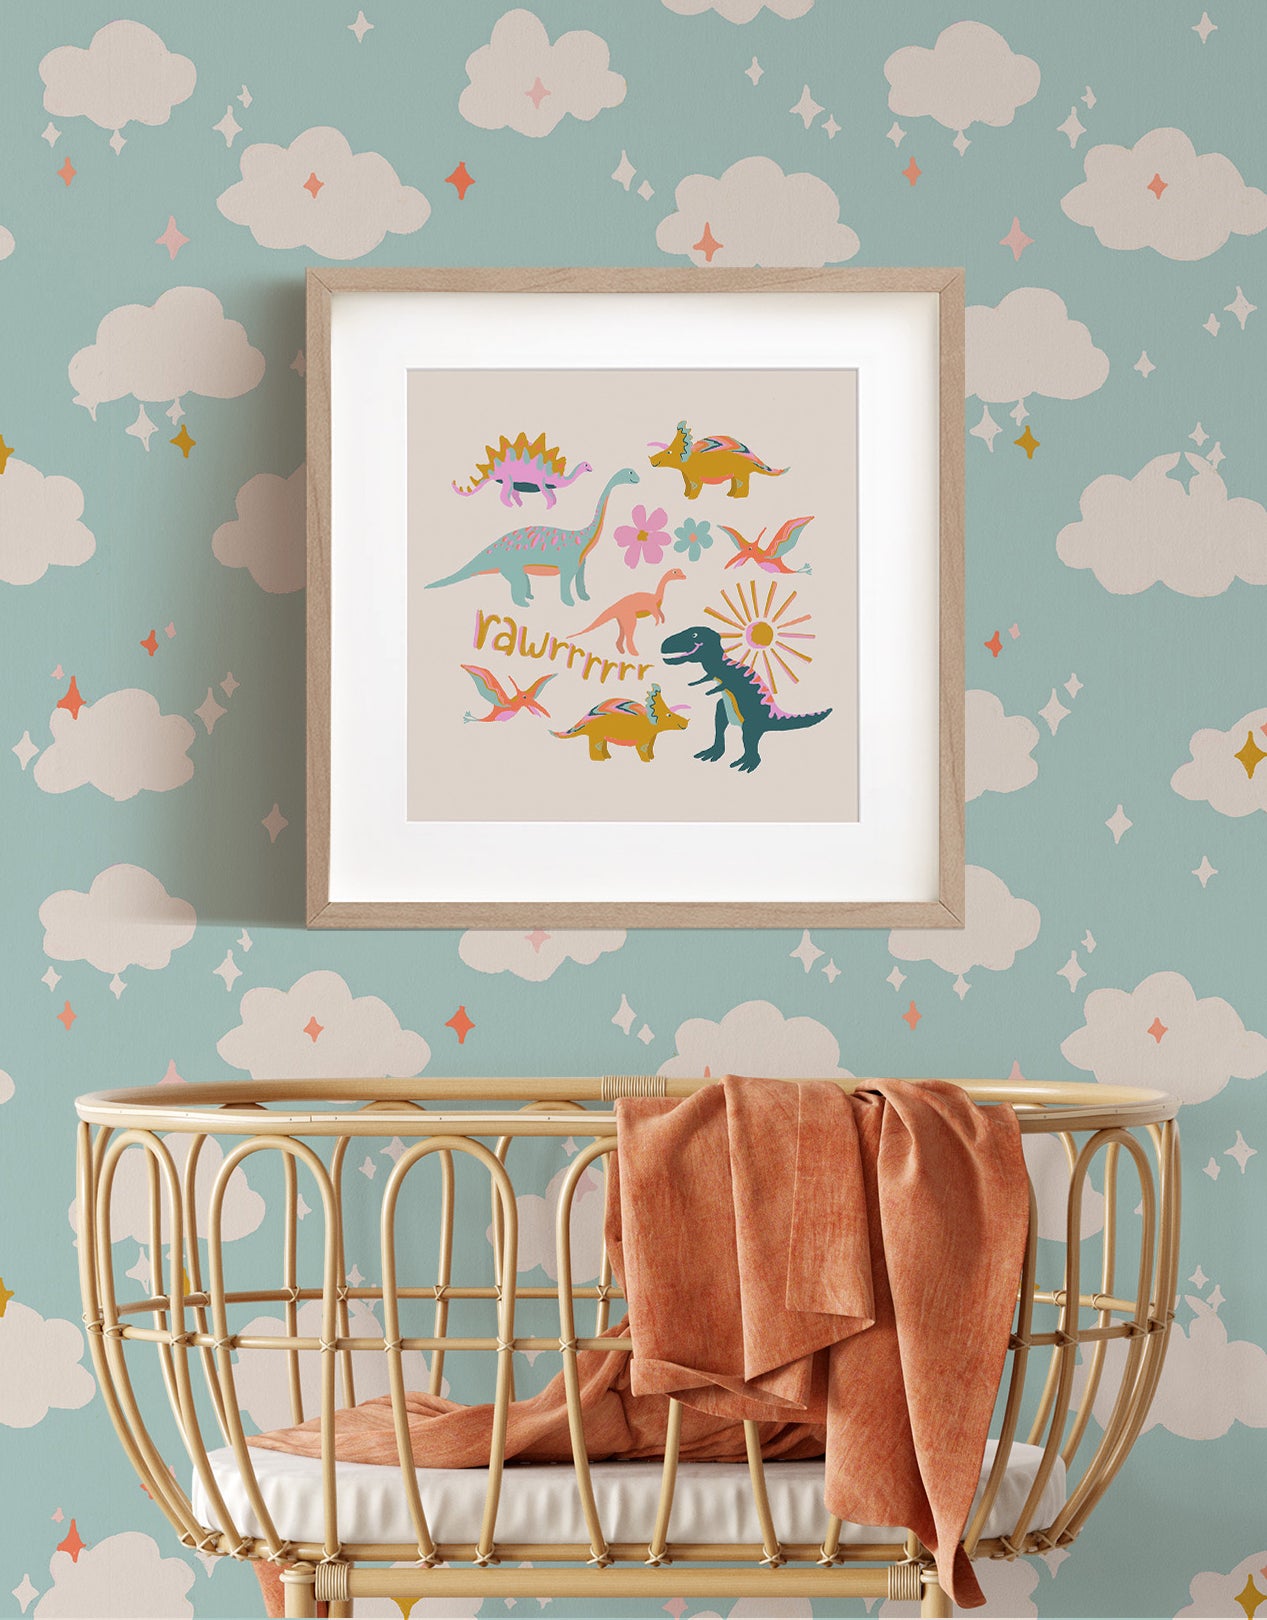 Nursery wall featuring a clouds wallpaper. Fun, colorful dinosaurs come to life in this Dinos art print designed by Iris + Sea for Ayara.